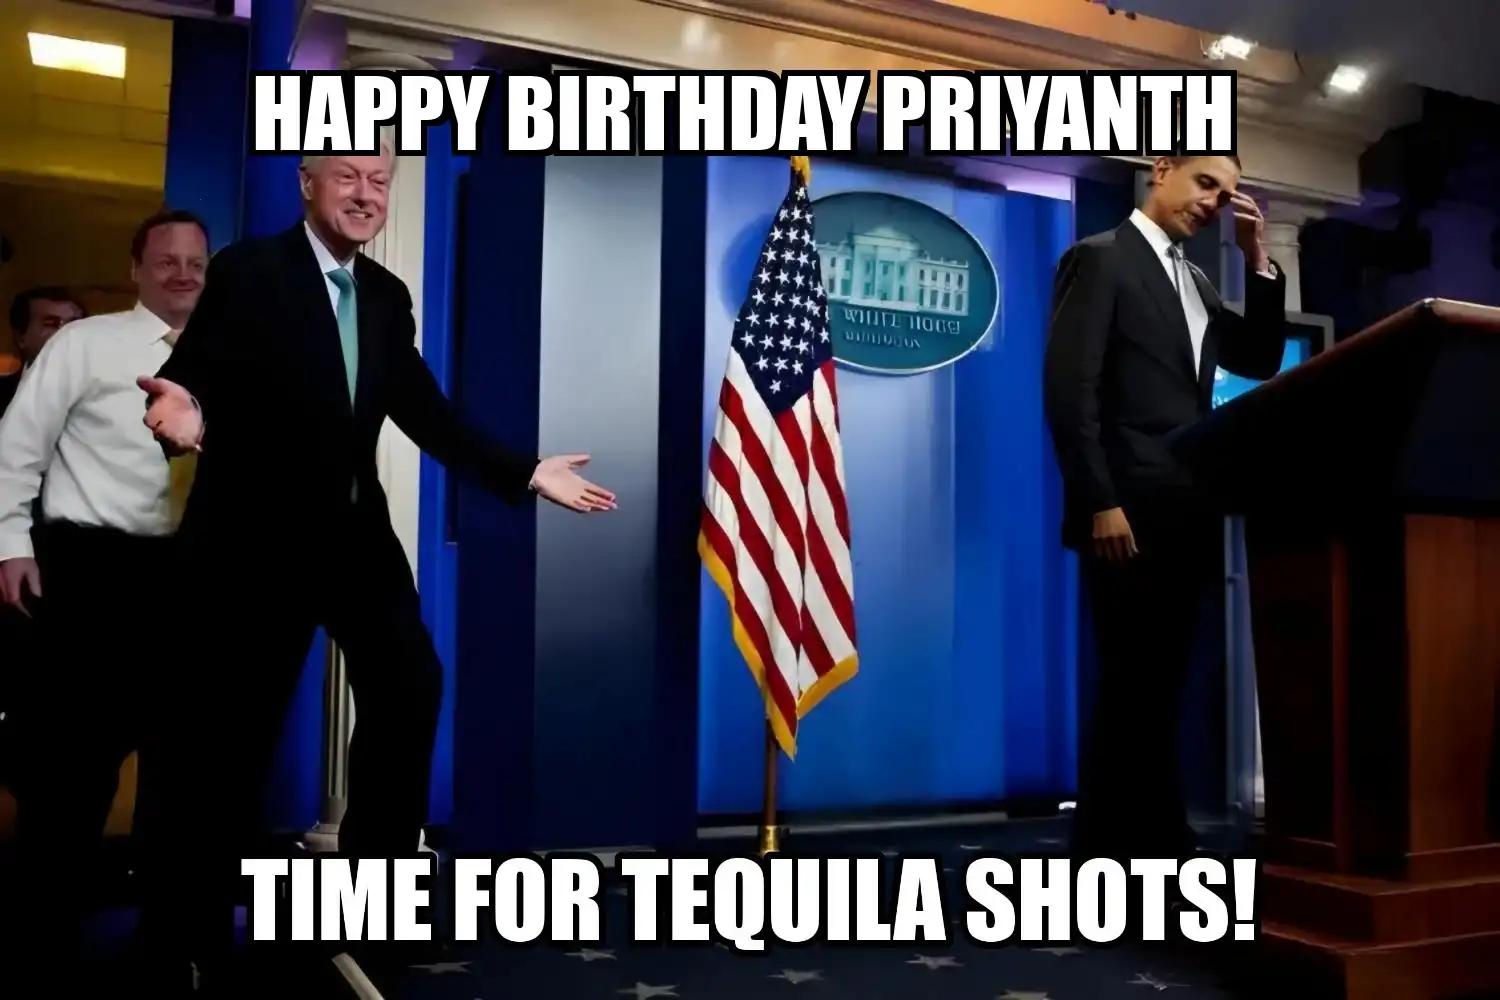 Happy Birthday Priyanth Time For Tequila Shots Memes